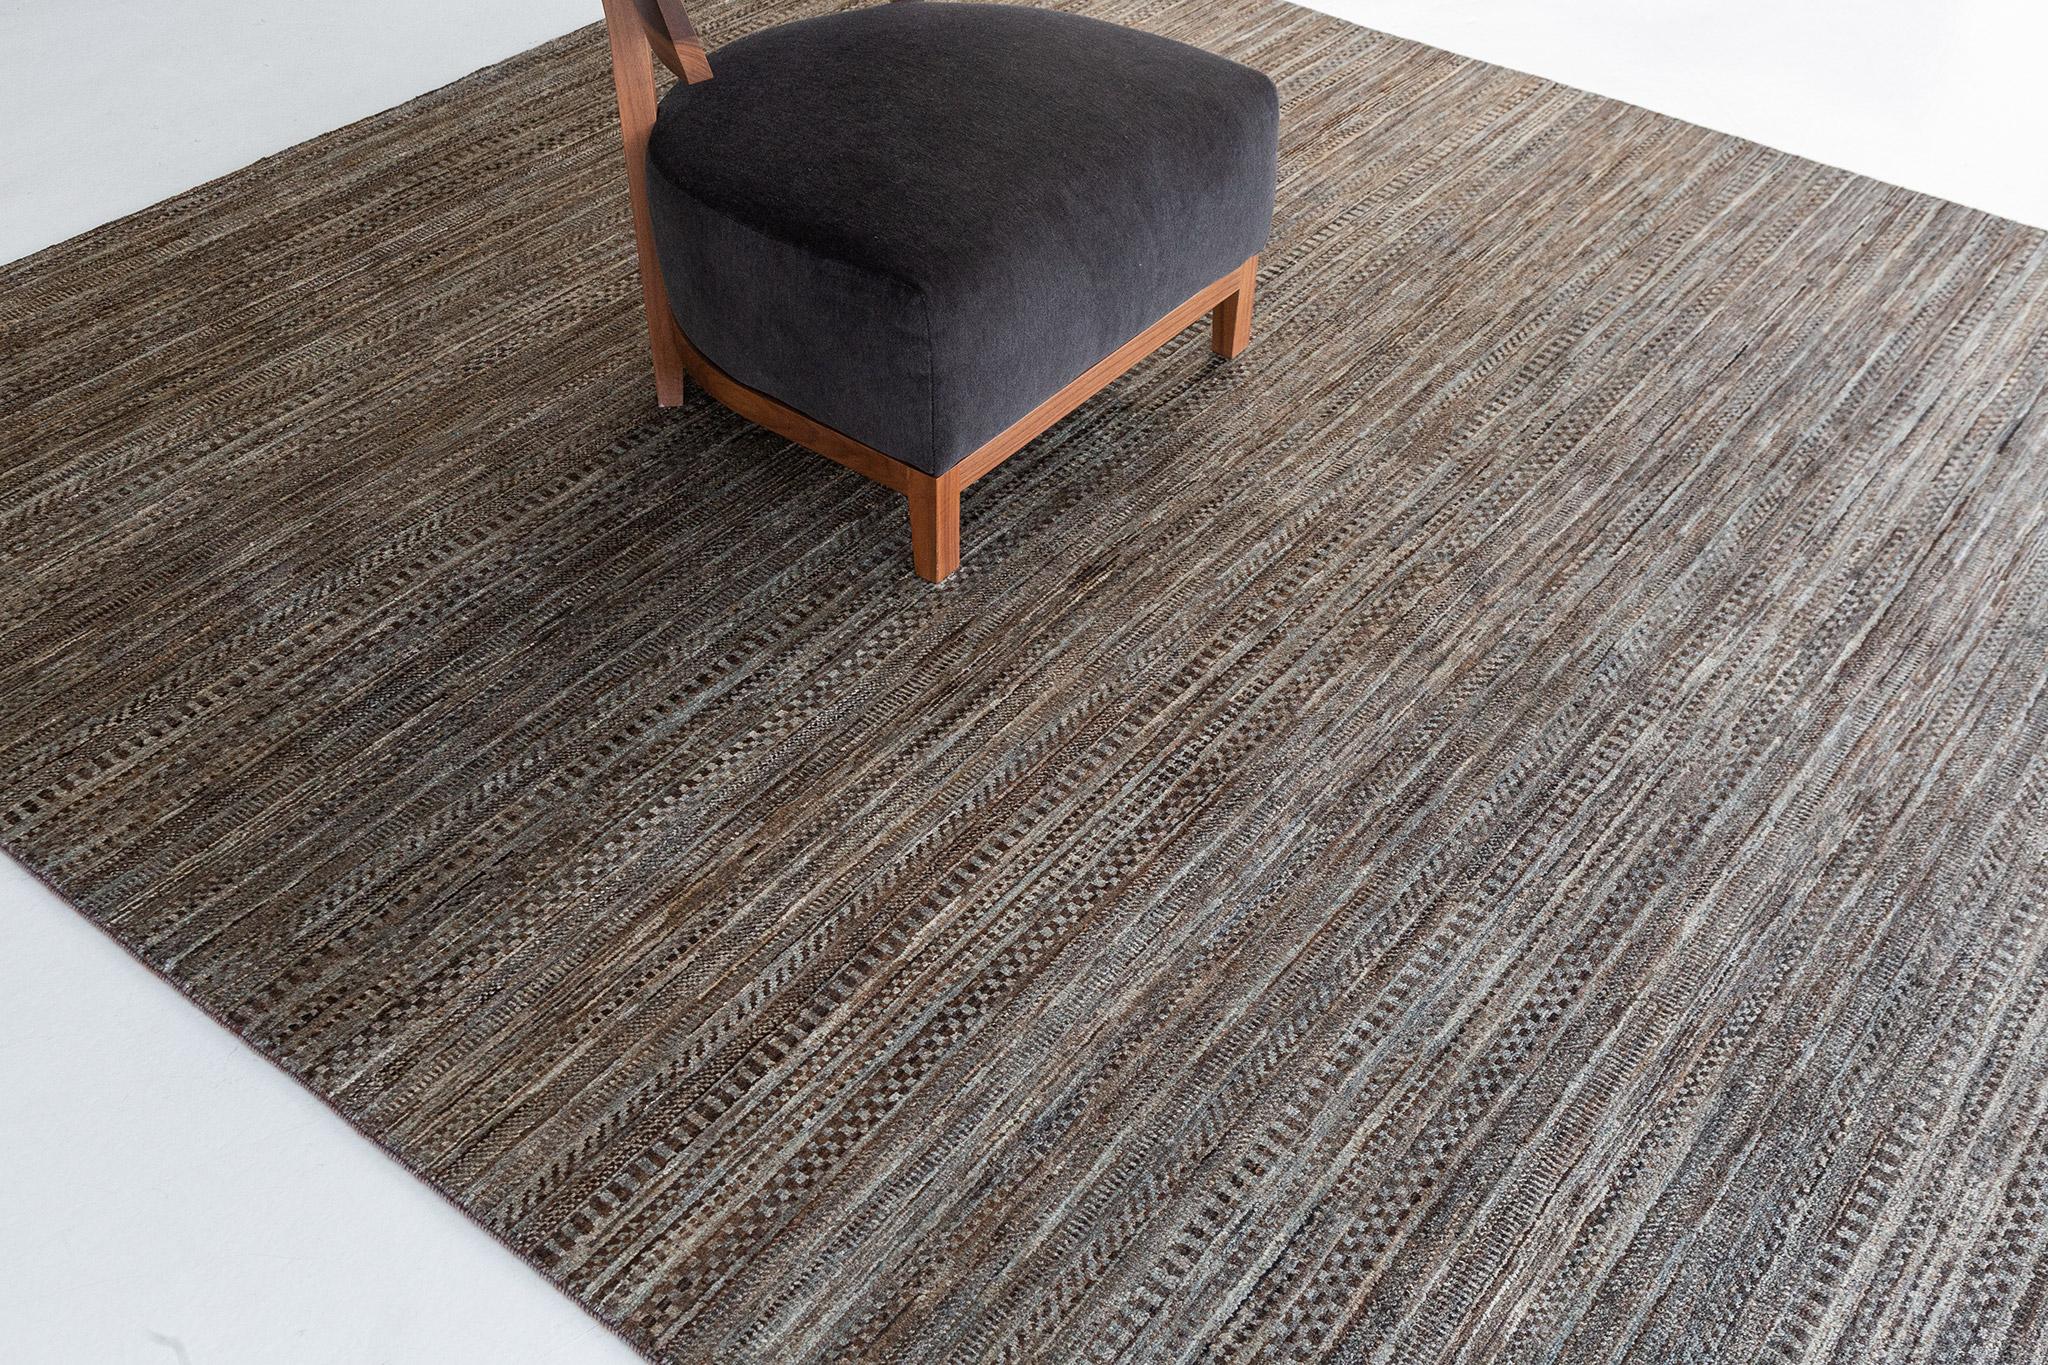 Vintaj is luxurious wool with horizontal strokes in deep gradations of charcoal, ivory, and cream. Its handwoven wool features a series of free-spirited rugs that feels innately soft underfoot and is enhanced by extraordinary, valiant designs worthy